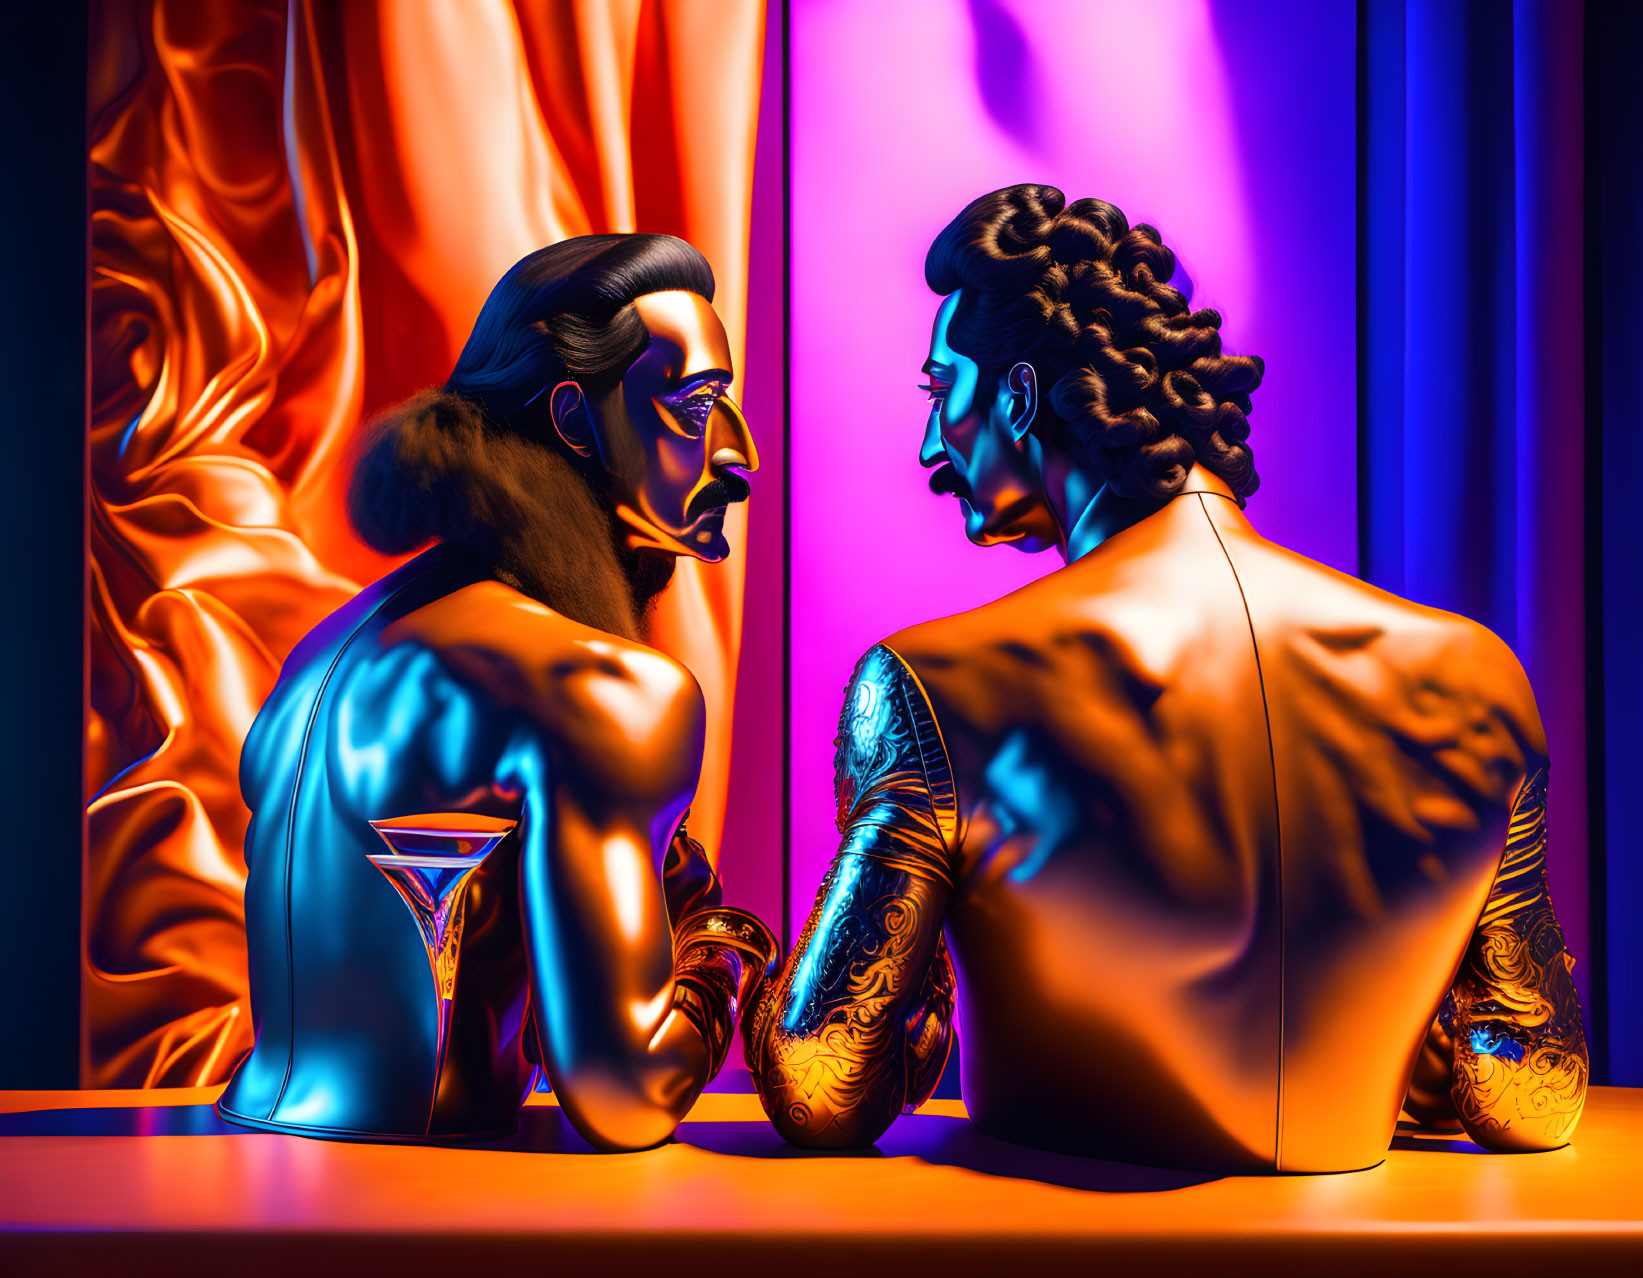 Metallic figures with tattoos in neon-lit scene with cocktail.